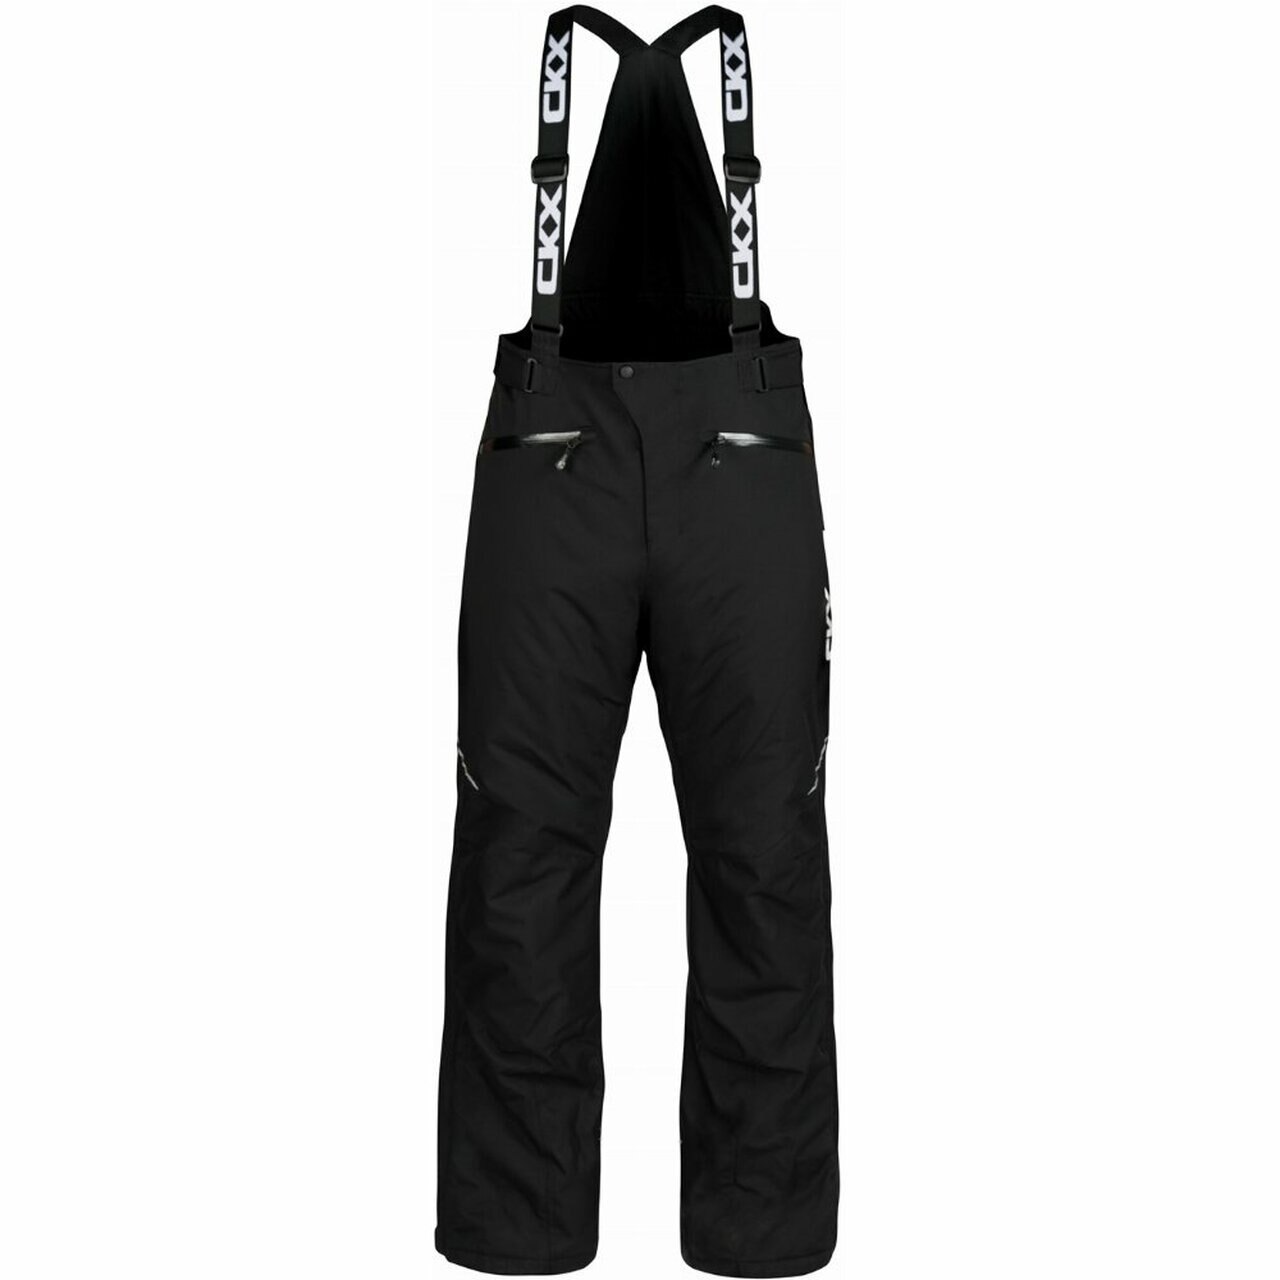 CKX MENS JOURNEY INSULATED PANTS L black